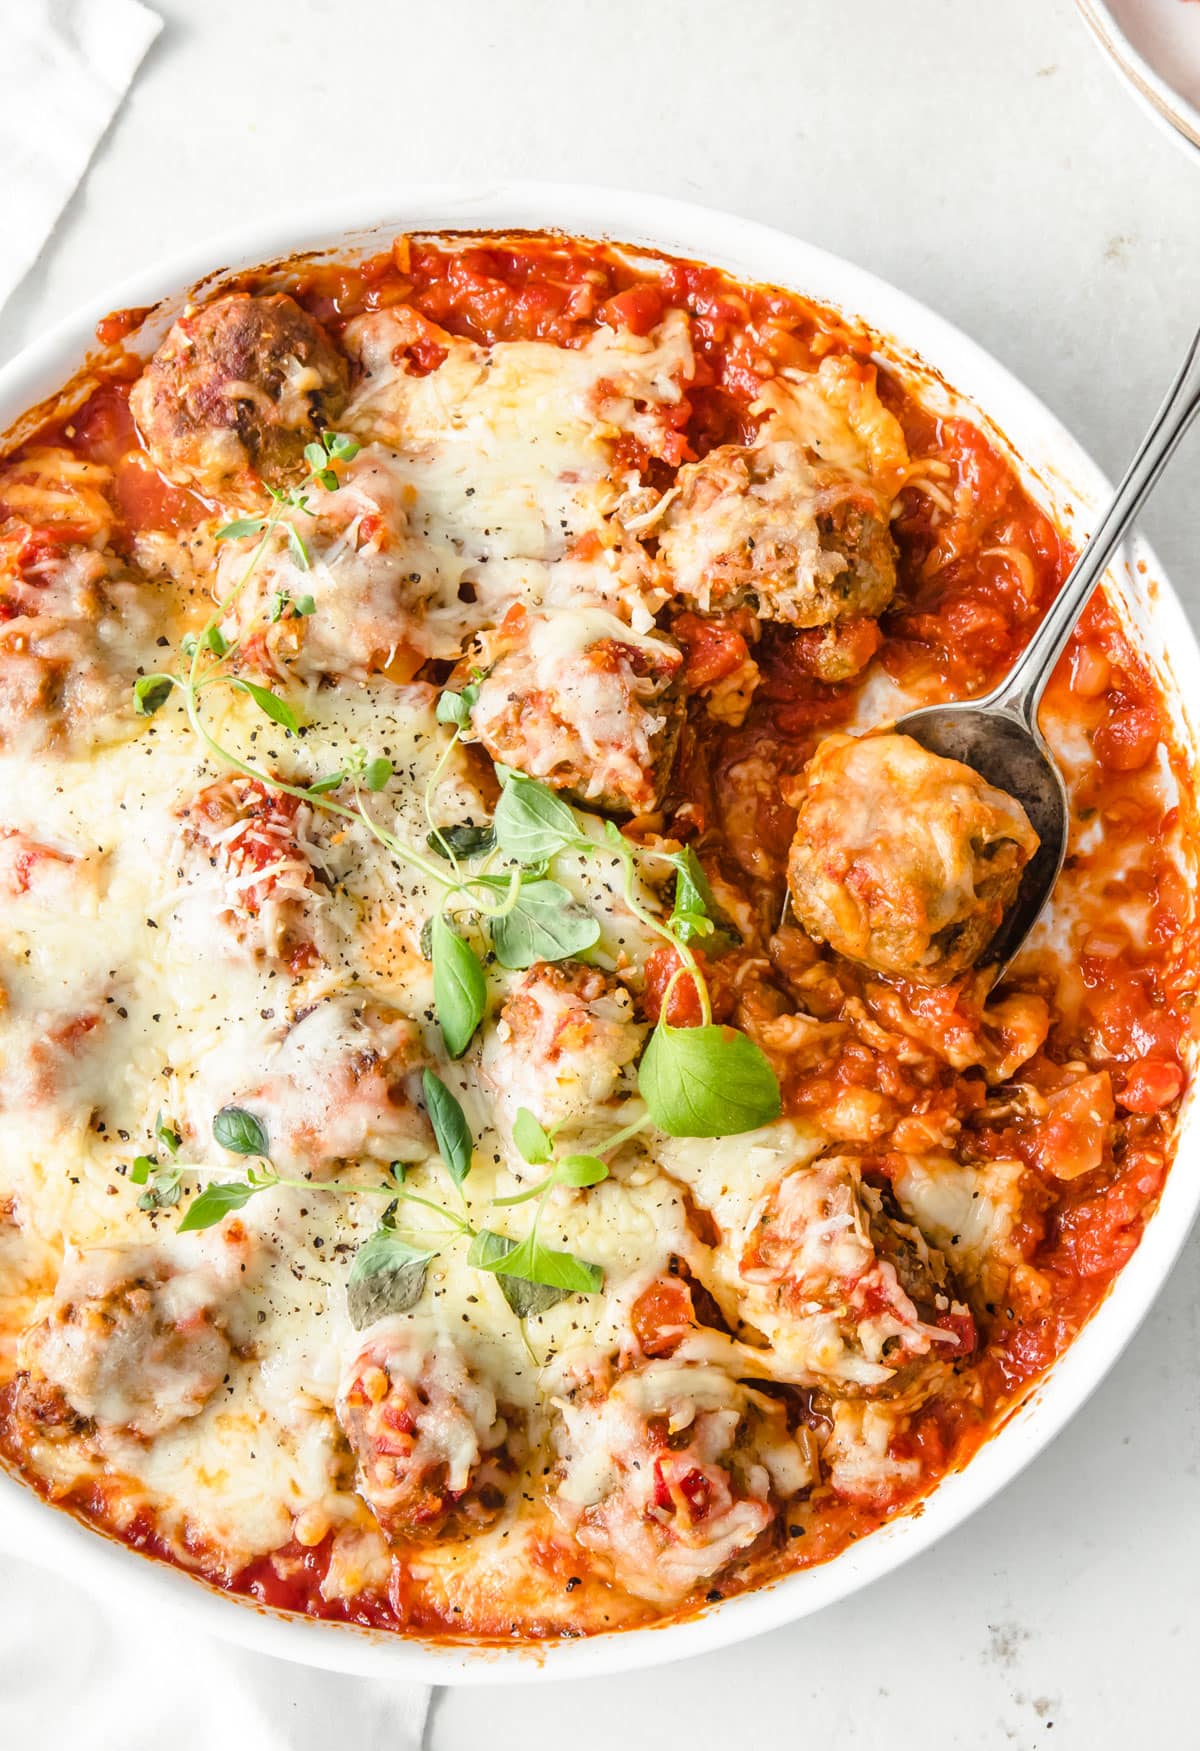 Baked meatballs in tomato sauce topped with melted cheese.